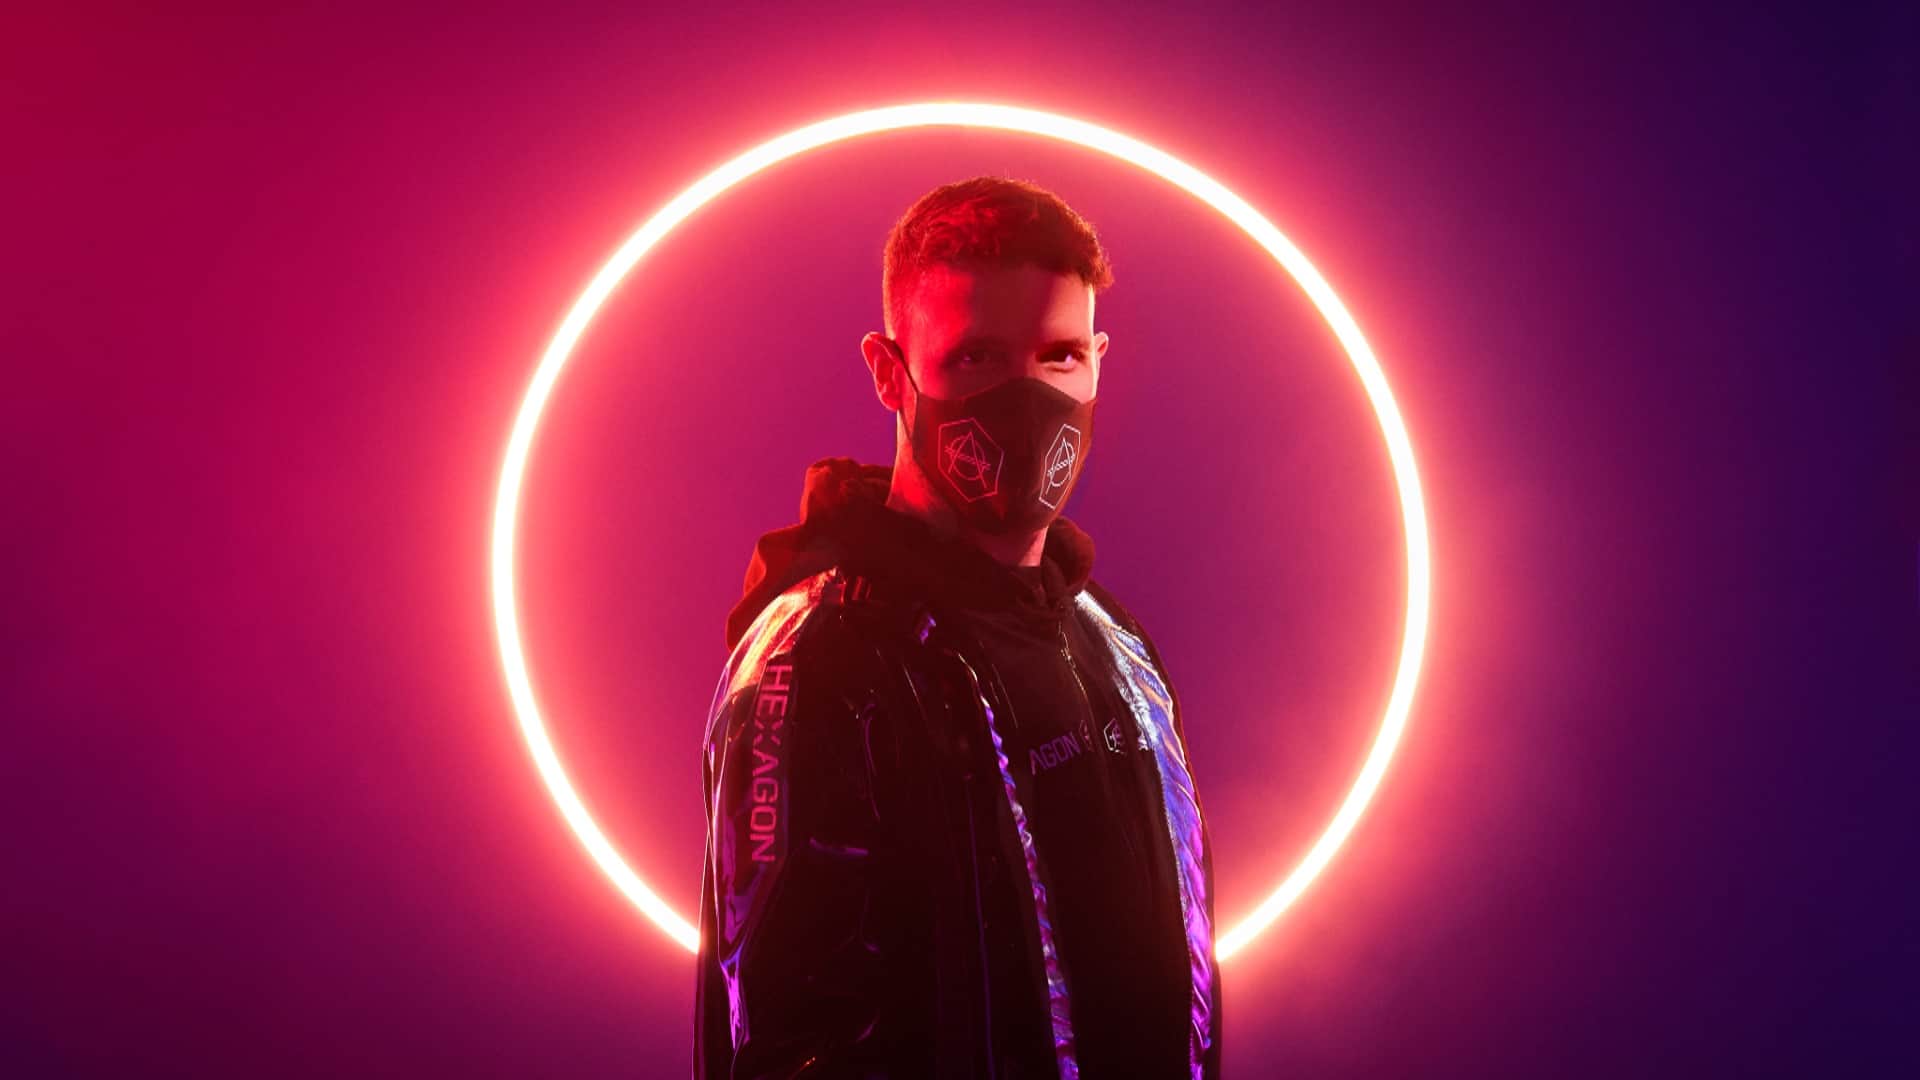 Don Diablo is going to appear on ‘MTV Cribs’